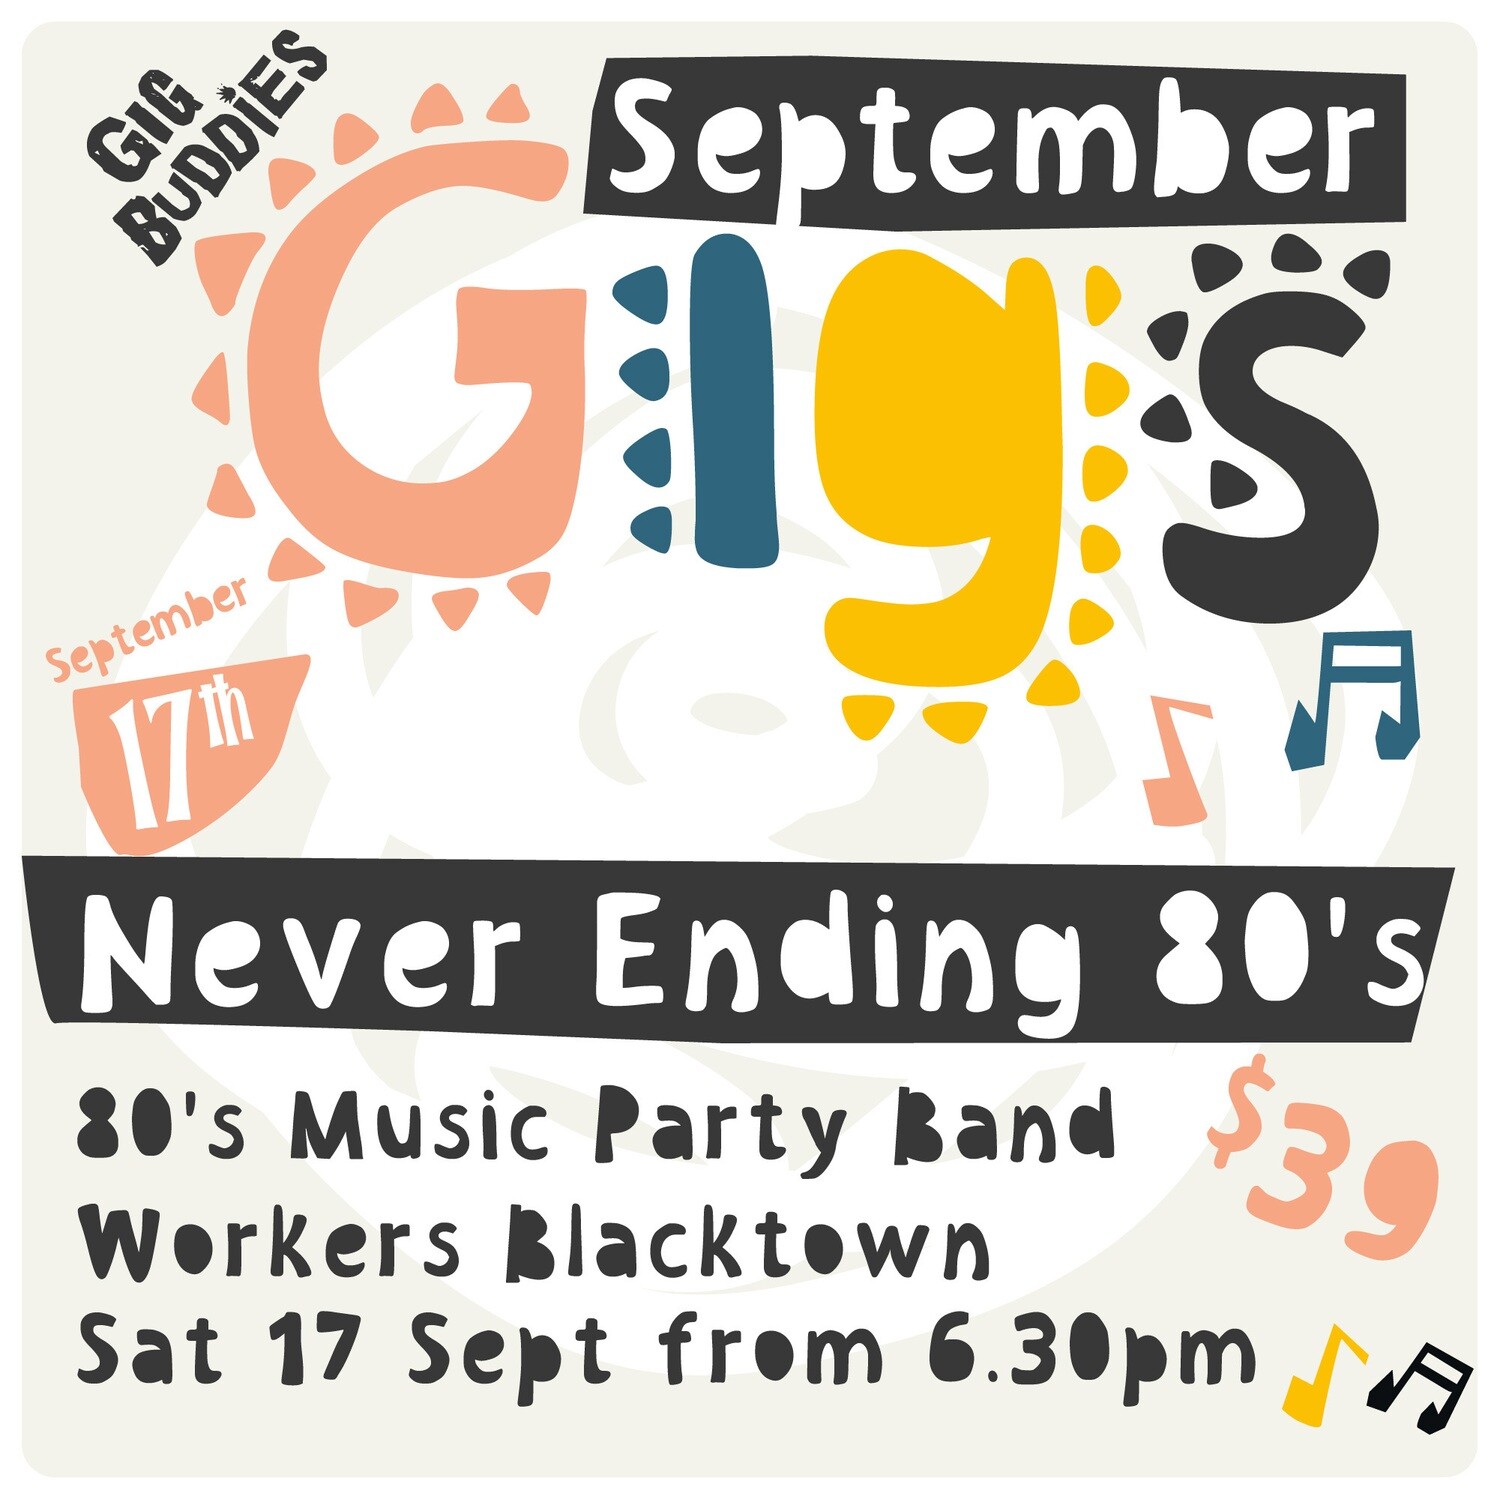 Never Ending 80s - Party like it's 1989 @ Workers Blacktown - Saturday 17 September